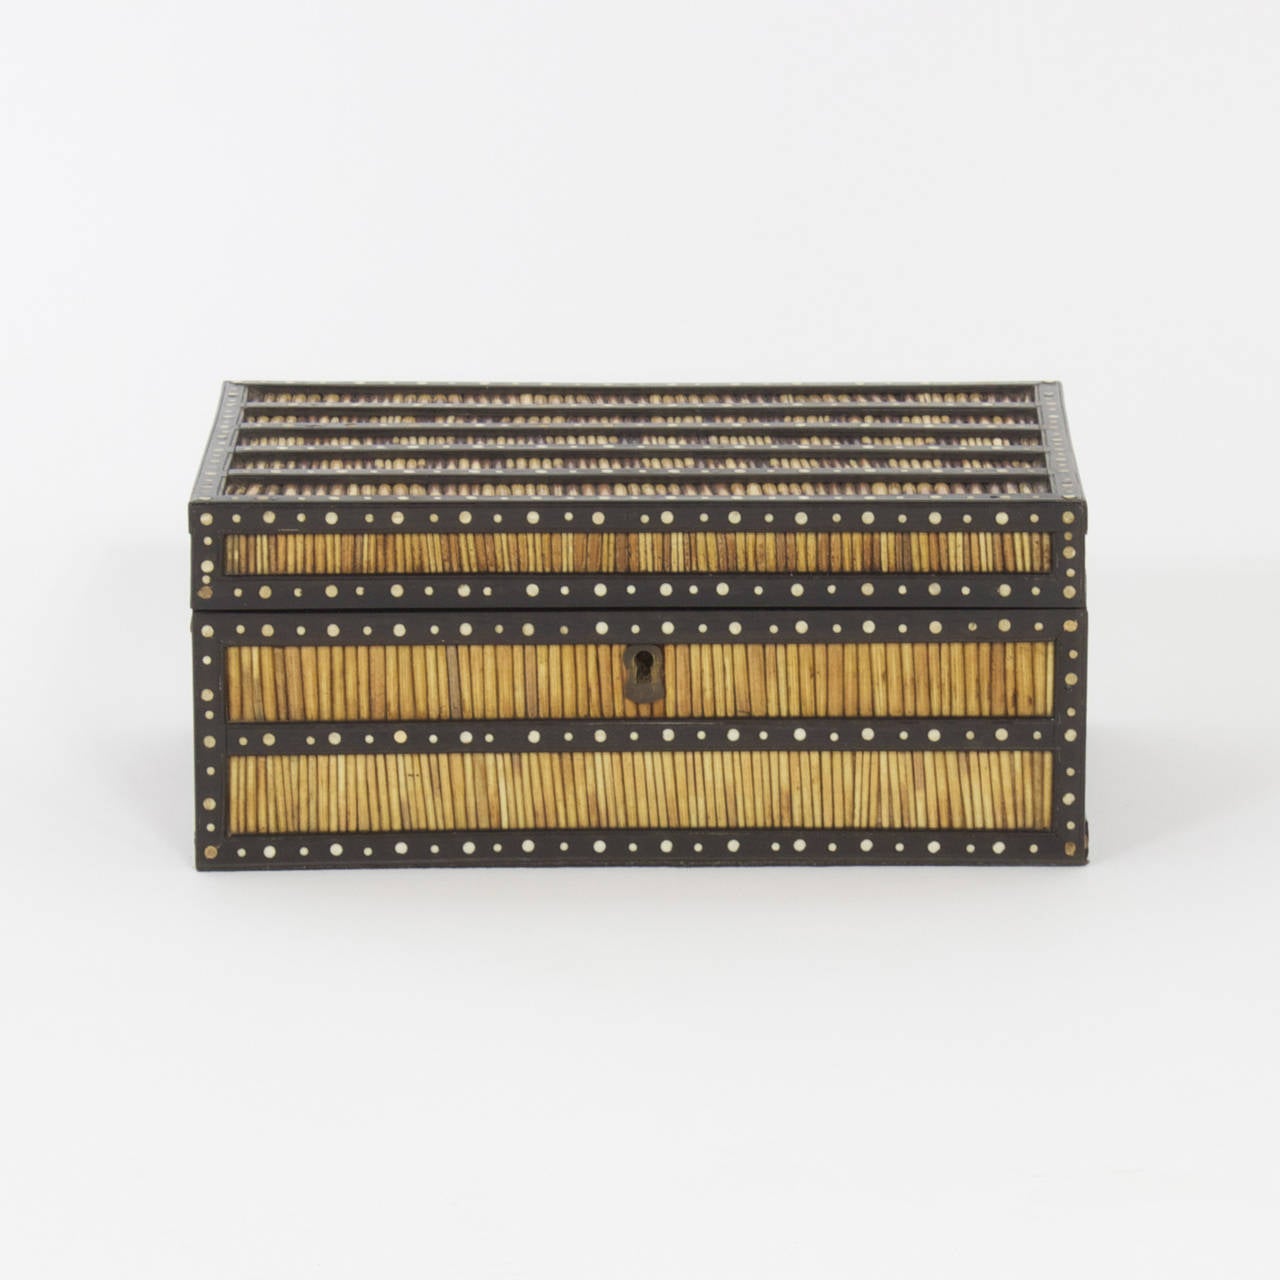 Exotic Ceylonese or Anglo Indian porcupine quill box with all the intricate craftsmanship you would expect, including bone dots, 12 interior compartments in a separate removable container and hard wood frame. Queen Victoria owned one, you can too.